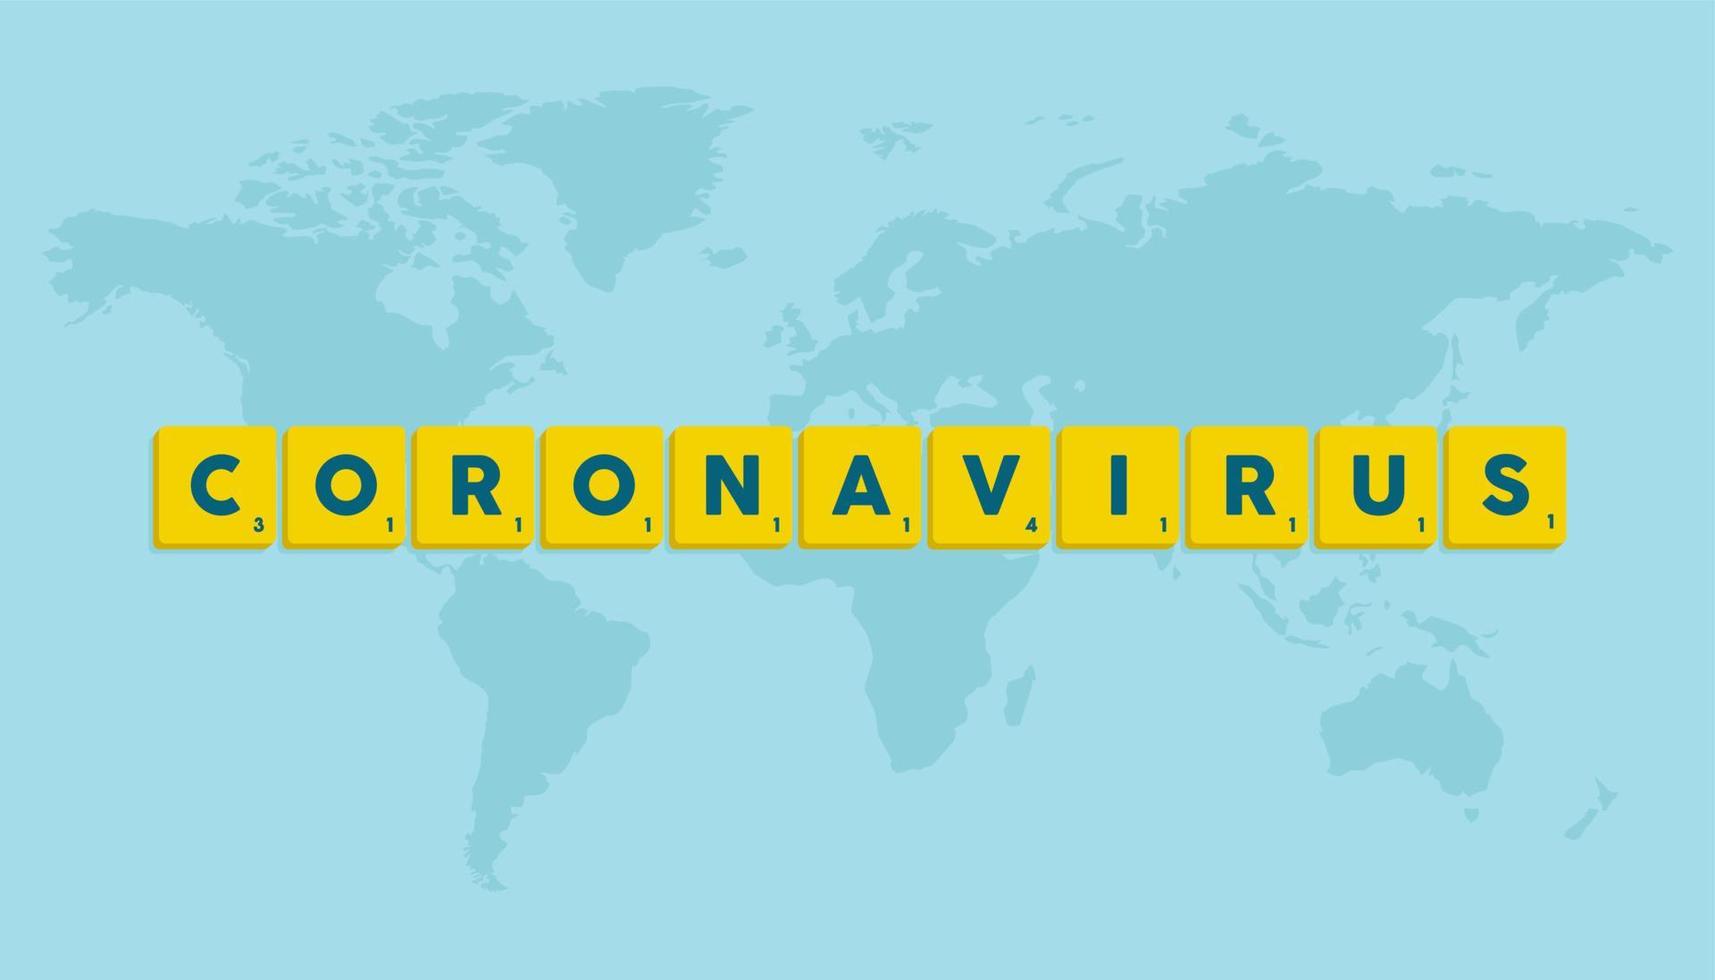 Coronavirus in letters with world map in blue background vector